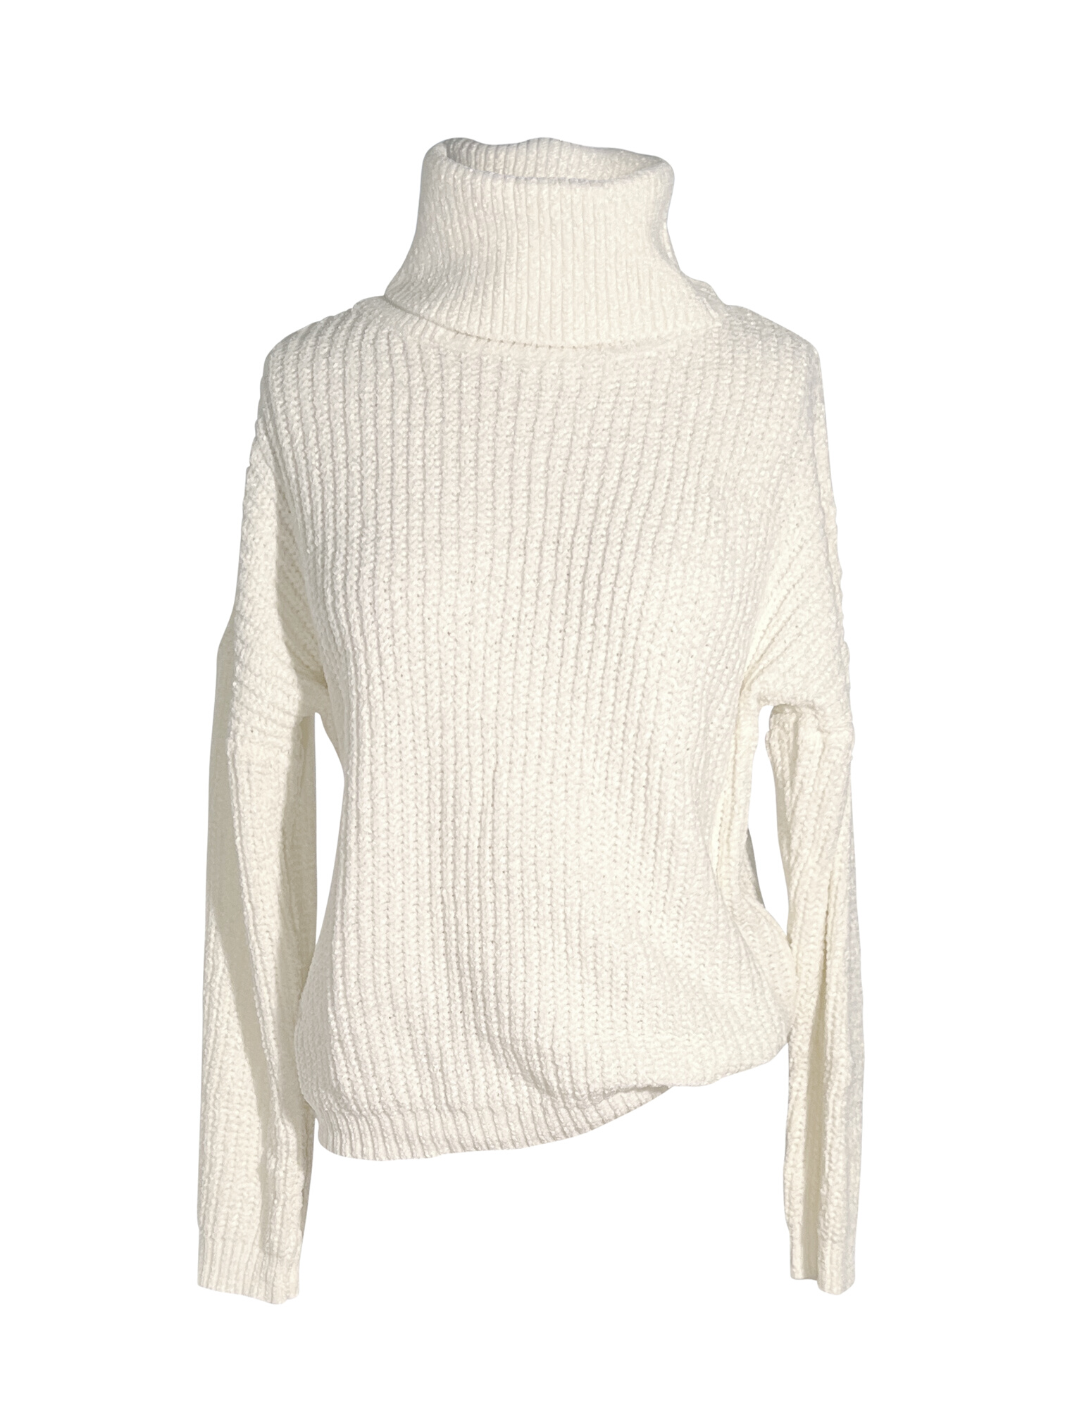 Soft and Sophisticated Ivory Turtleneck Sweater